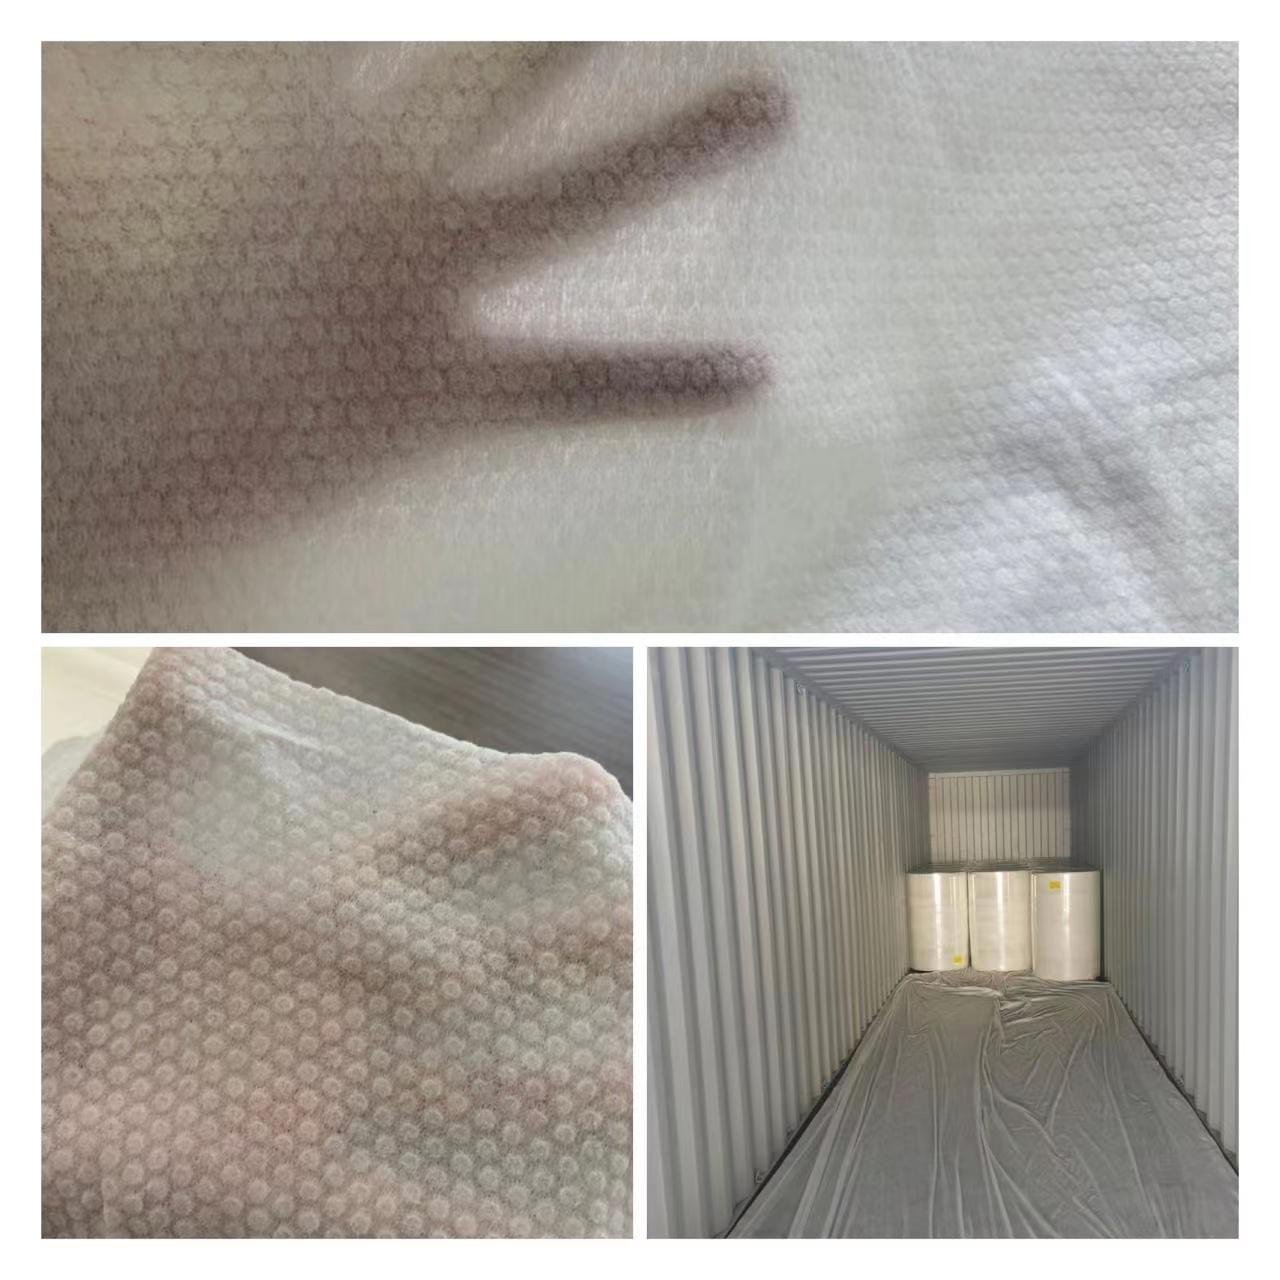 Wet tissue,Wet wipes,Cleaning wipesSpunlace Nonwoven Material 4